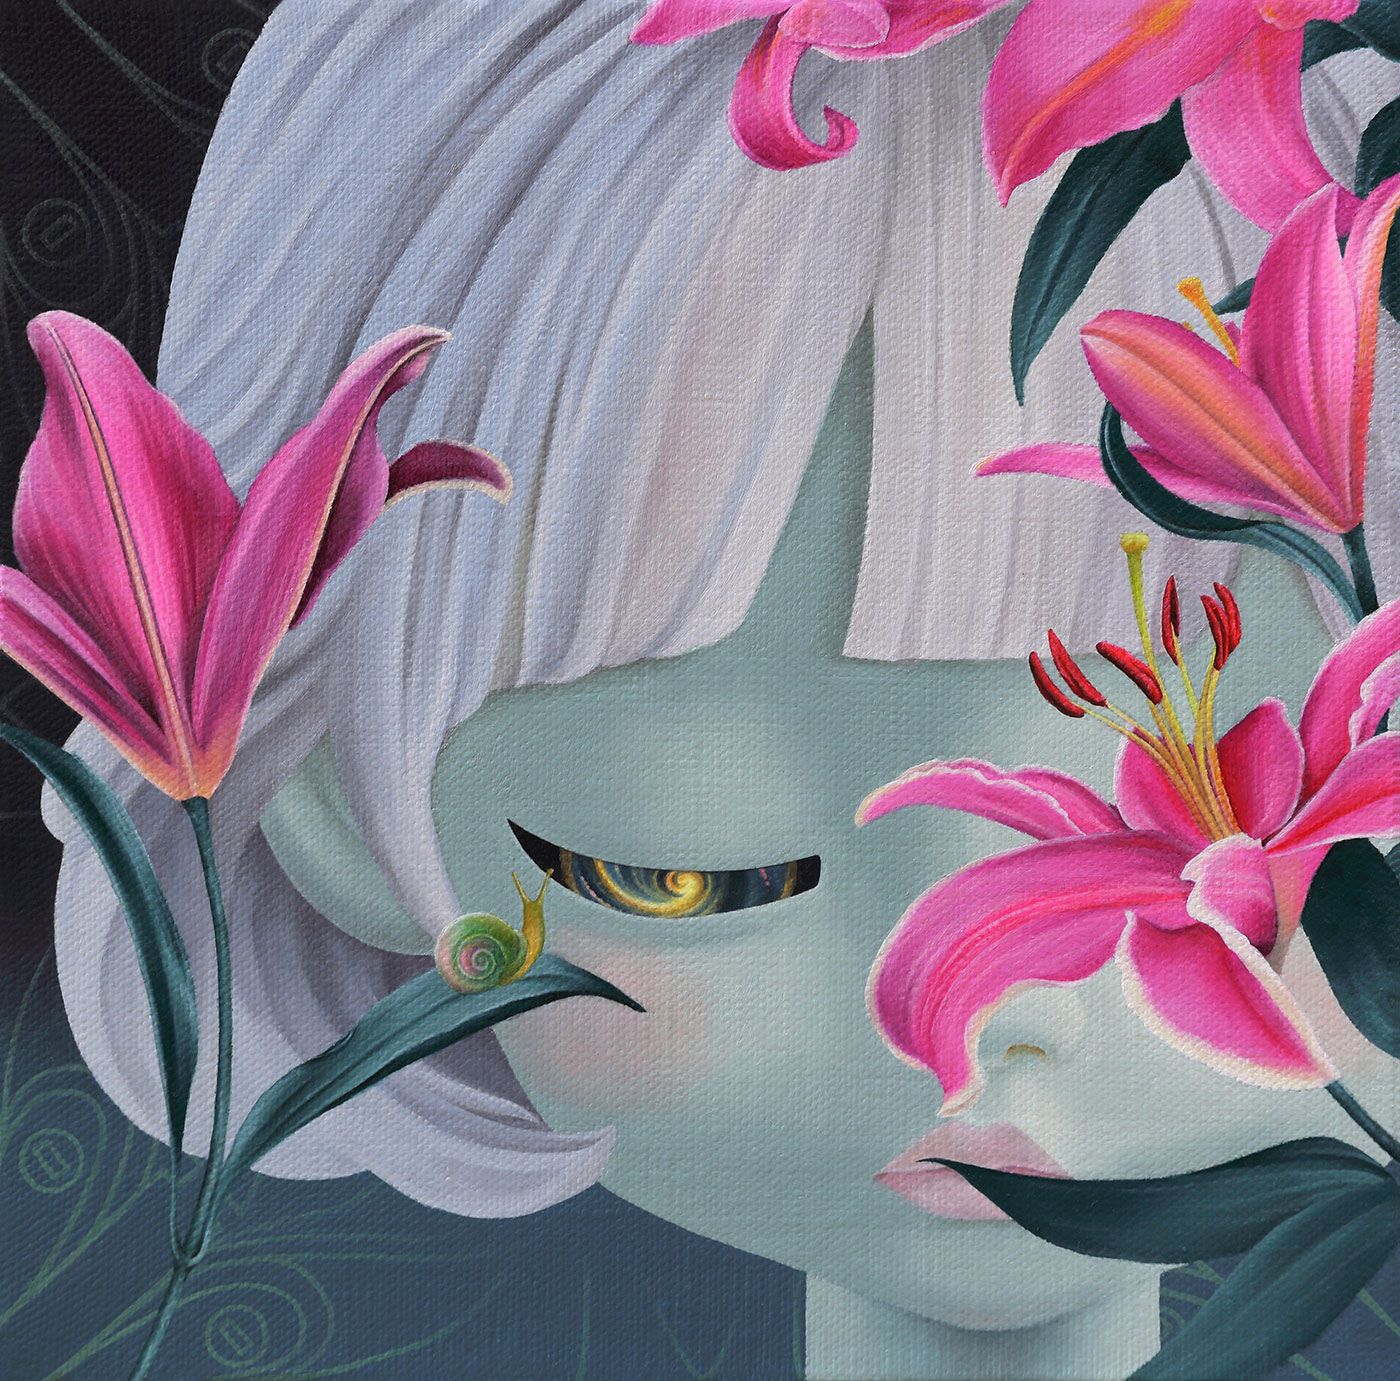 An image of one of the pieces from The Corey Helford Gallery's newest exhibit, Lucid Dreaming.